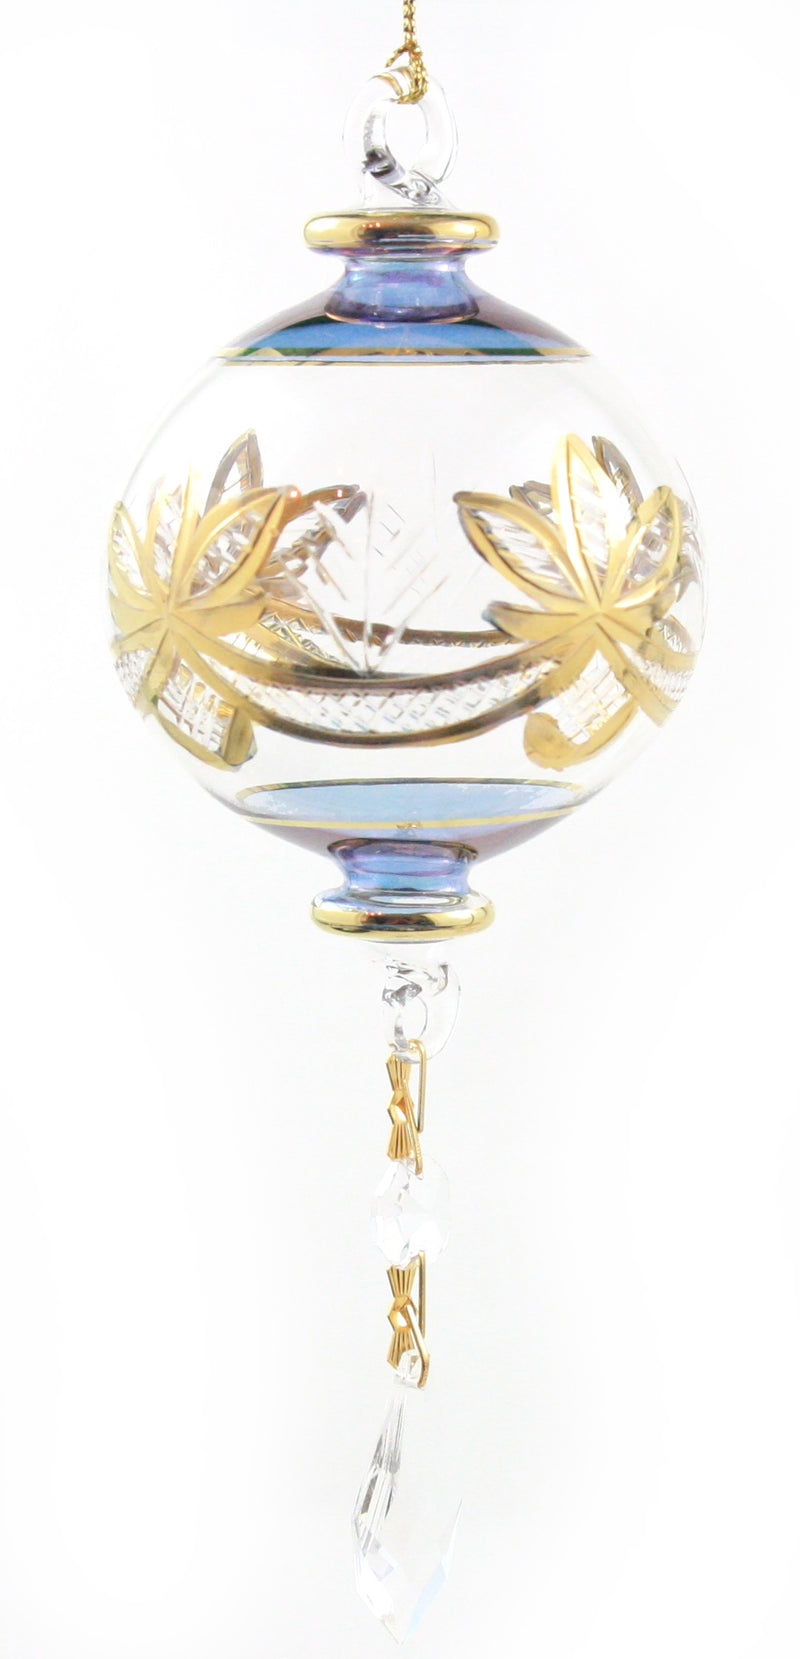 Special Etching Crystal Ball with Dangles Ornament - Blue